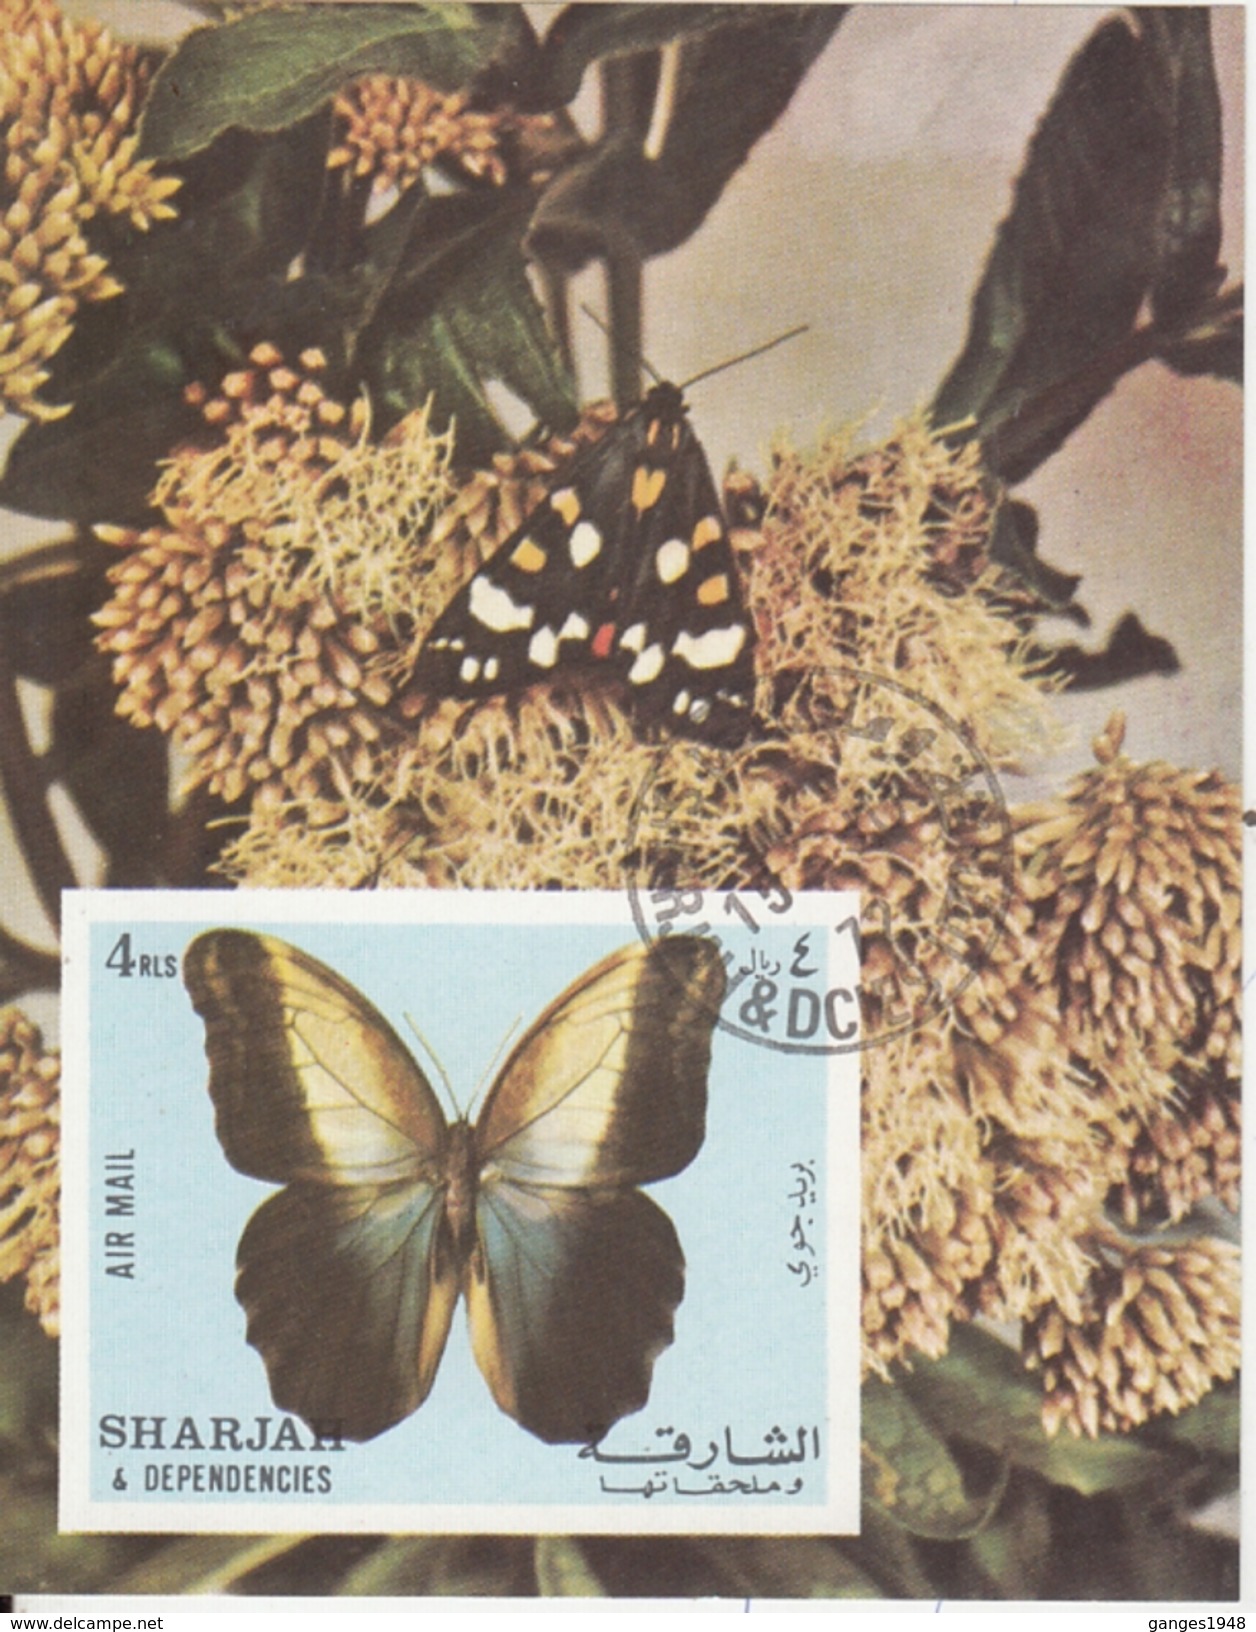 Sharjah  Middle East   Butterflies  Papillons  Insects  Fauna   Cto  Used  Miniature Sheet   # 75317 - Farfalle